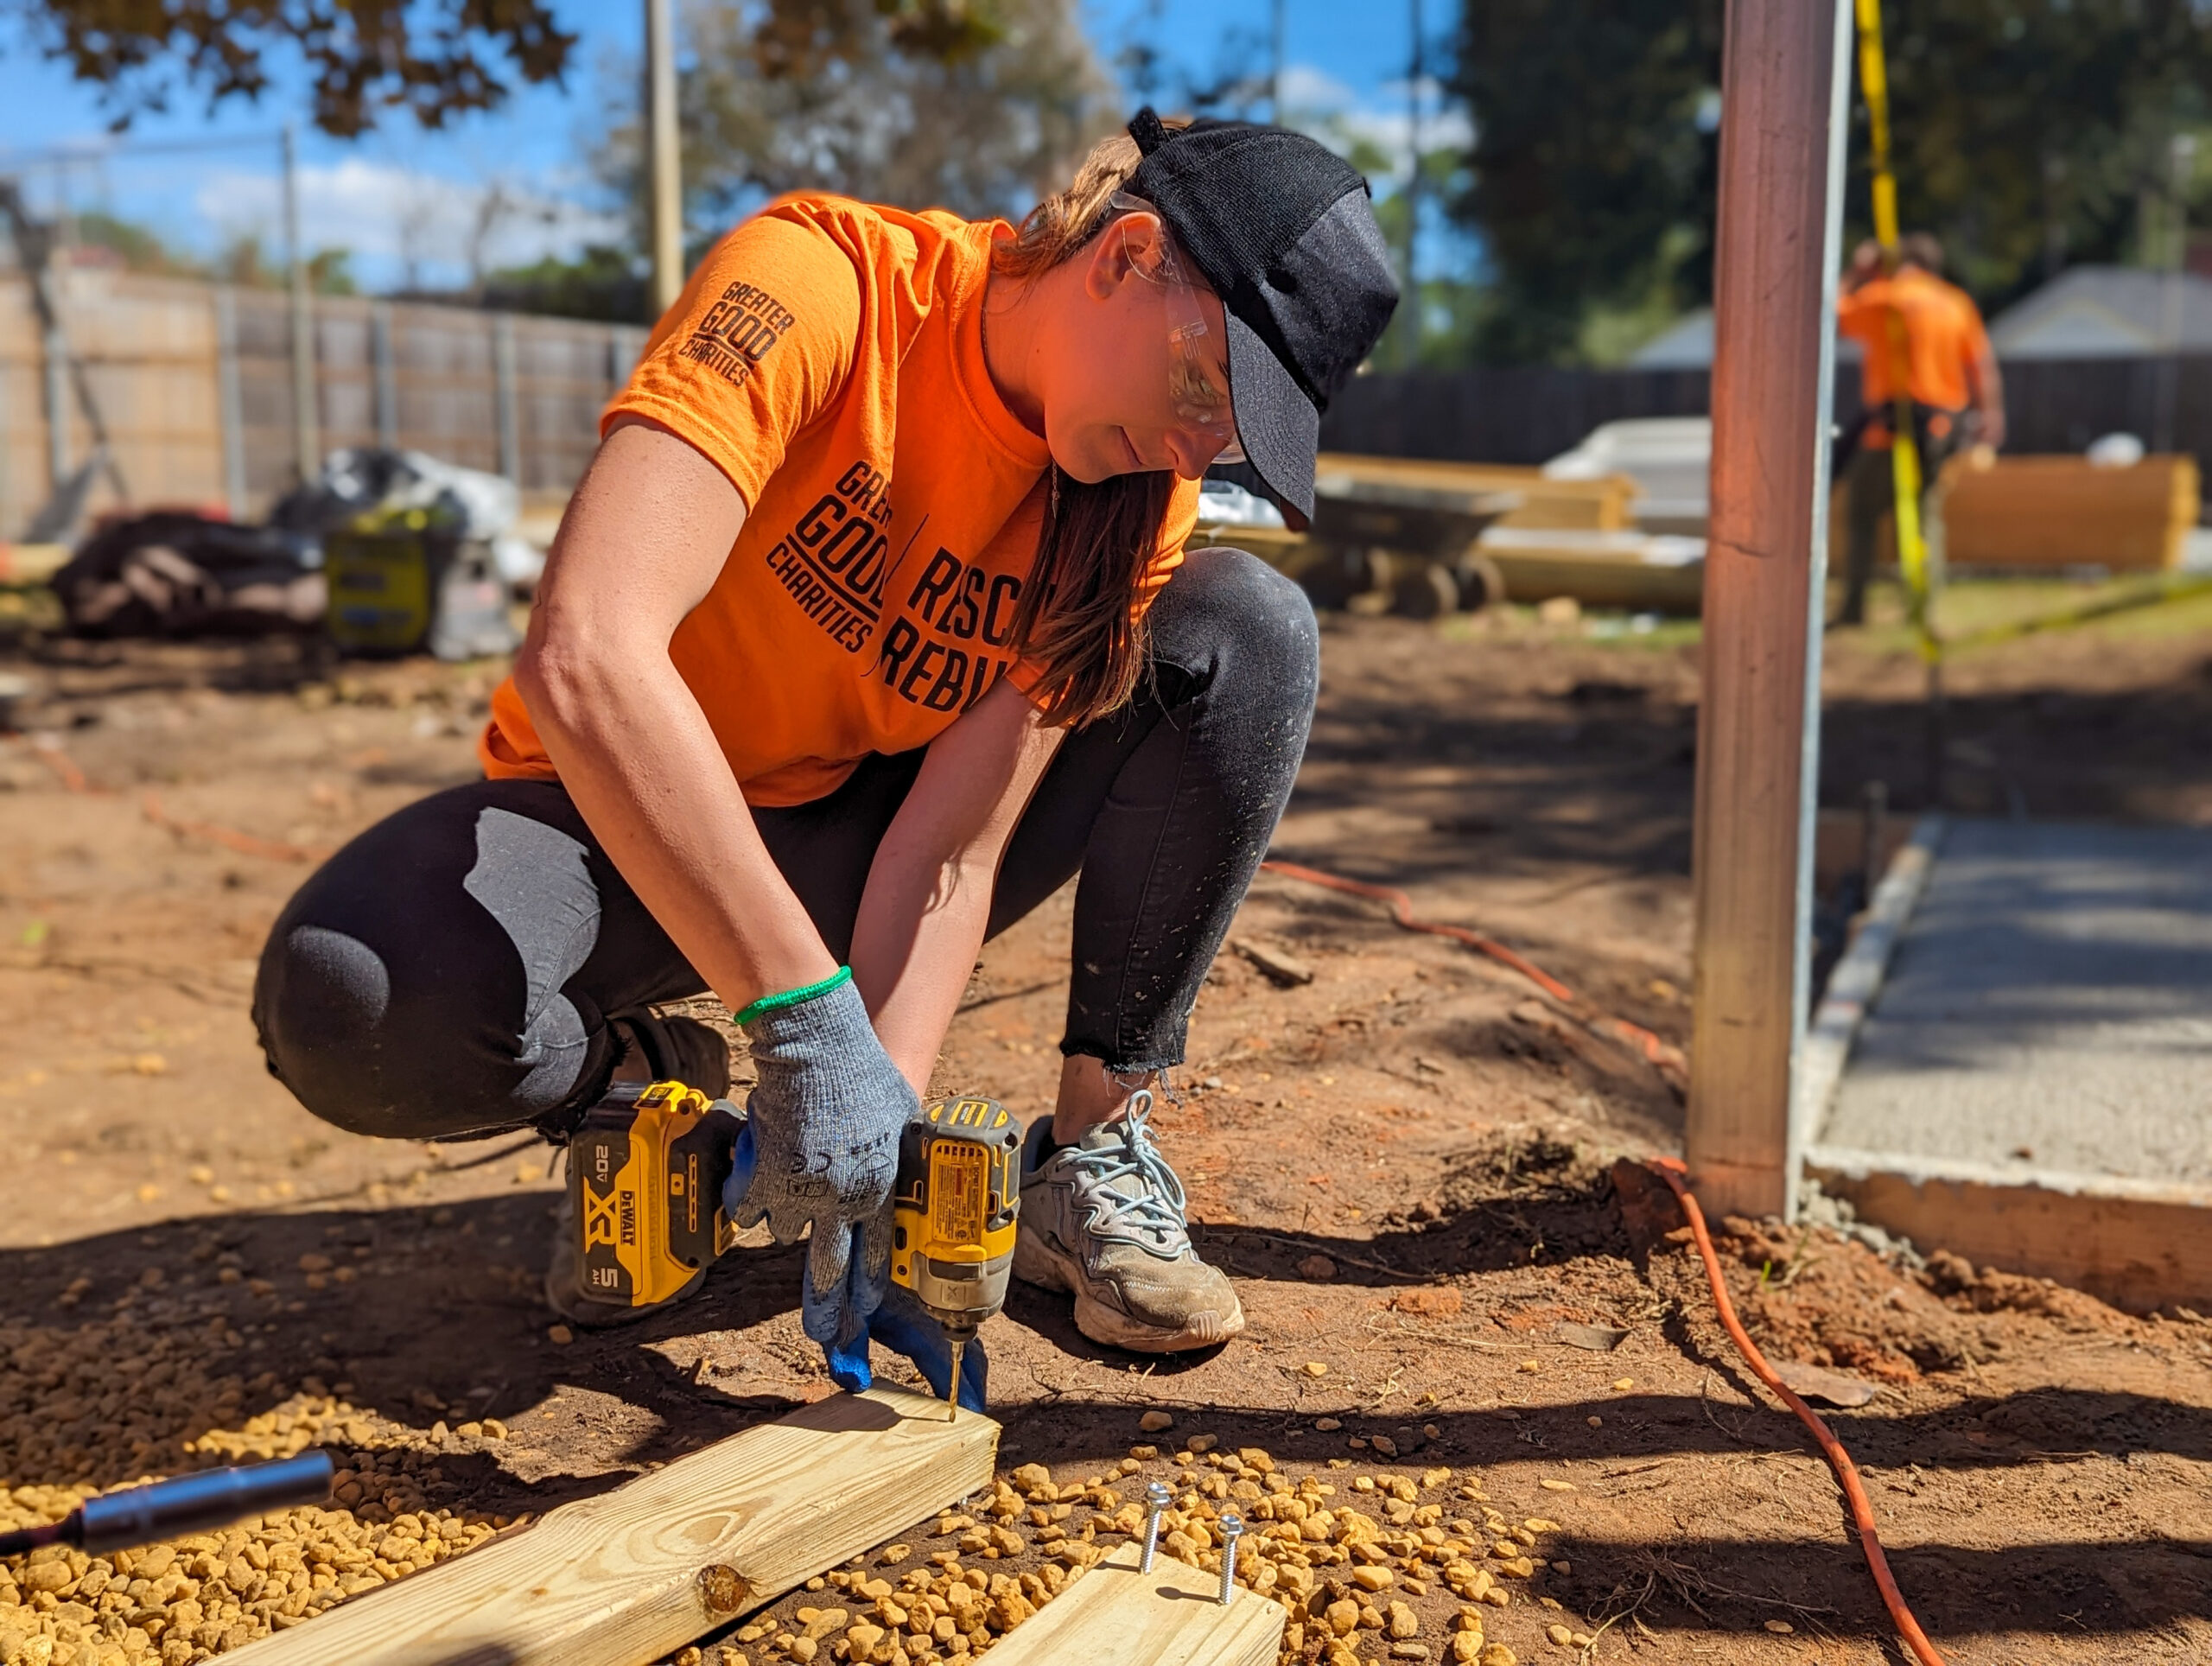 A woman kneels down to drill a hole in a wooden board. Her orange shirt reads "Greater Good Charities Rescue Rebuild".